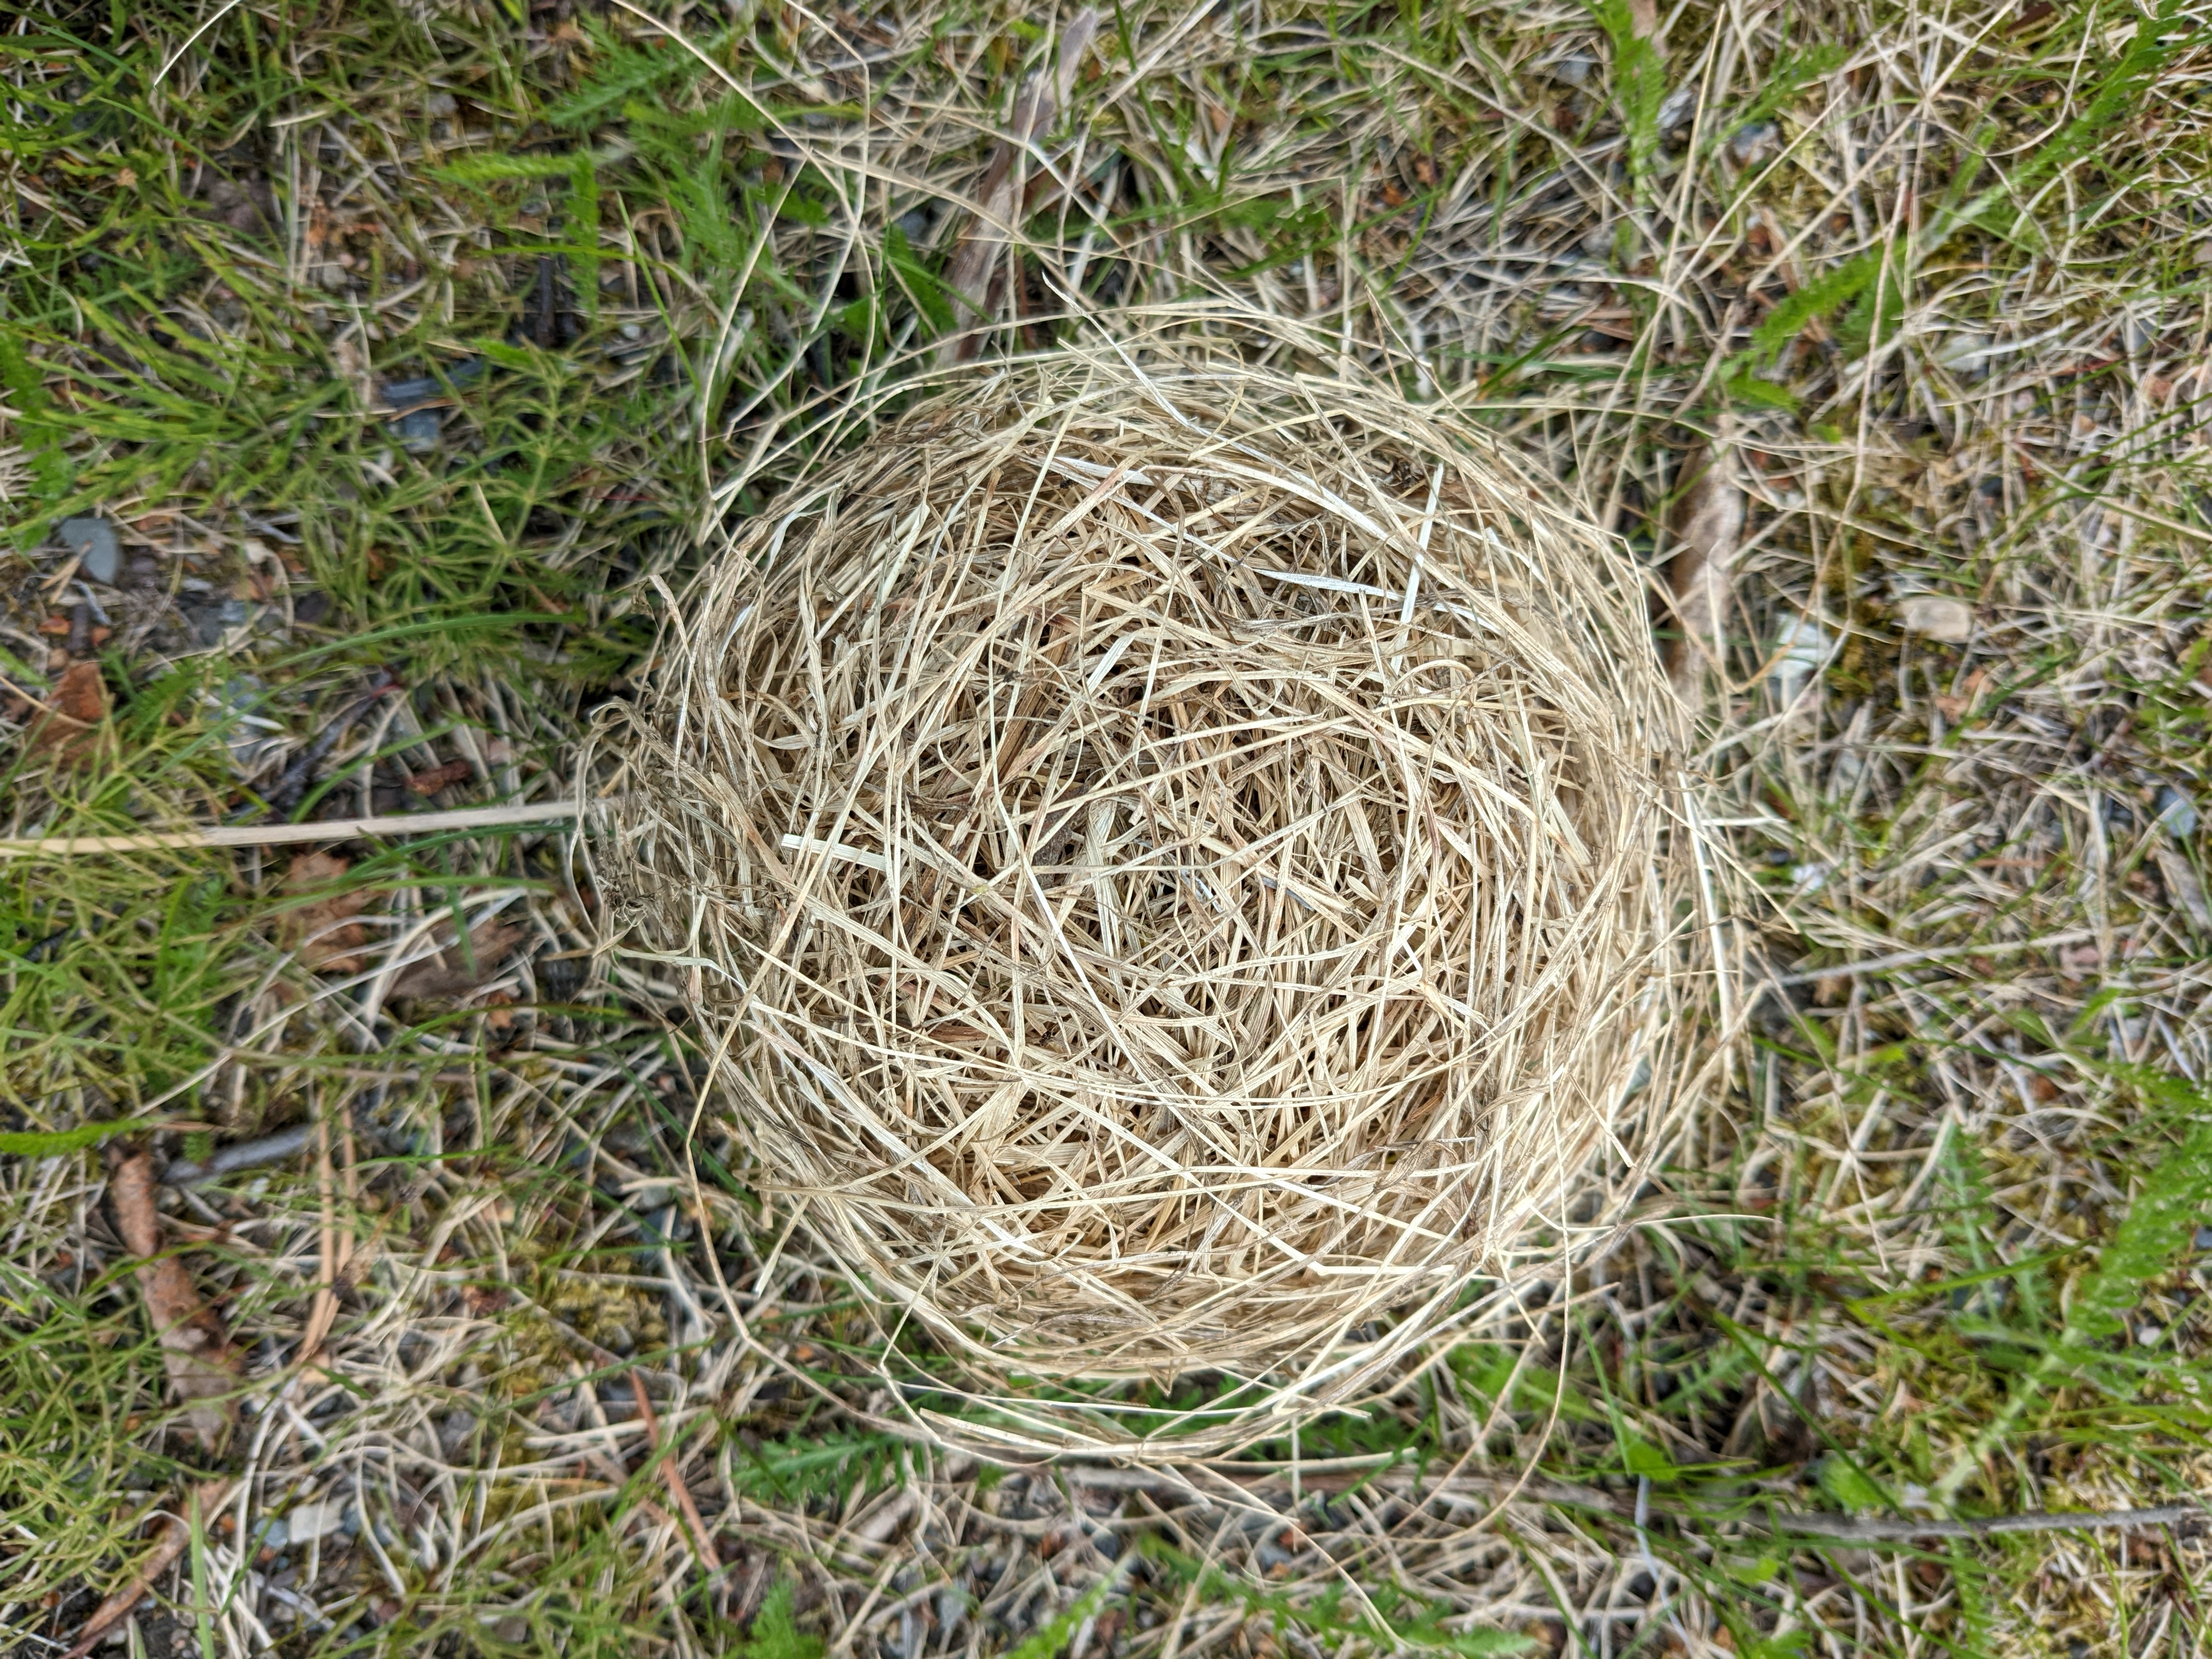 a very round bird's nest of light-colored grass sitting upside down on the ground